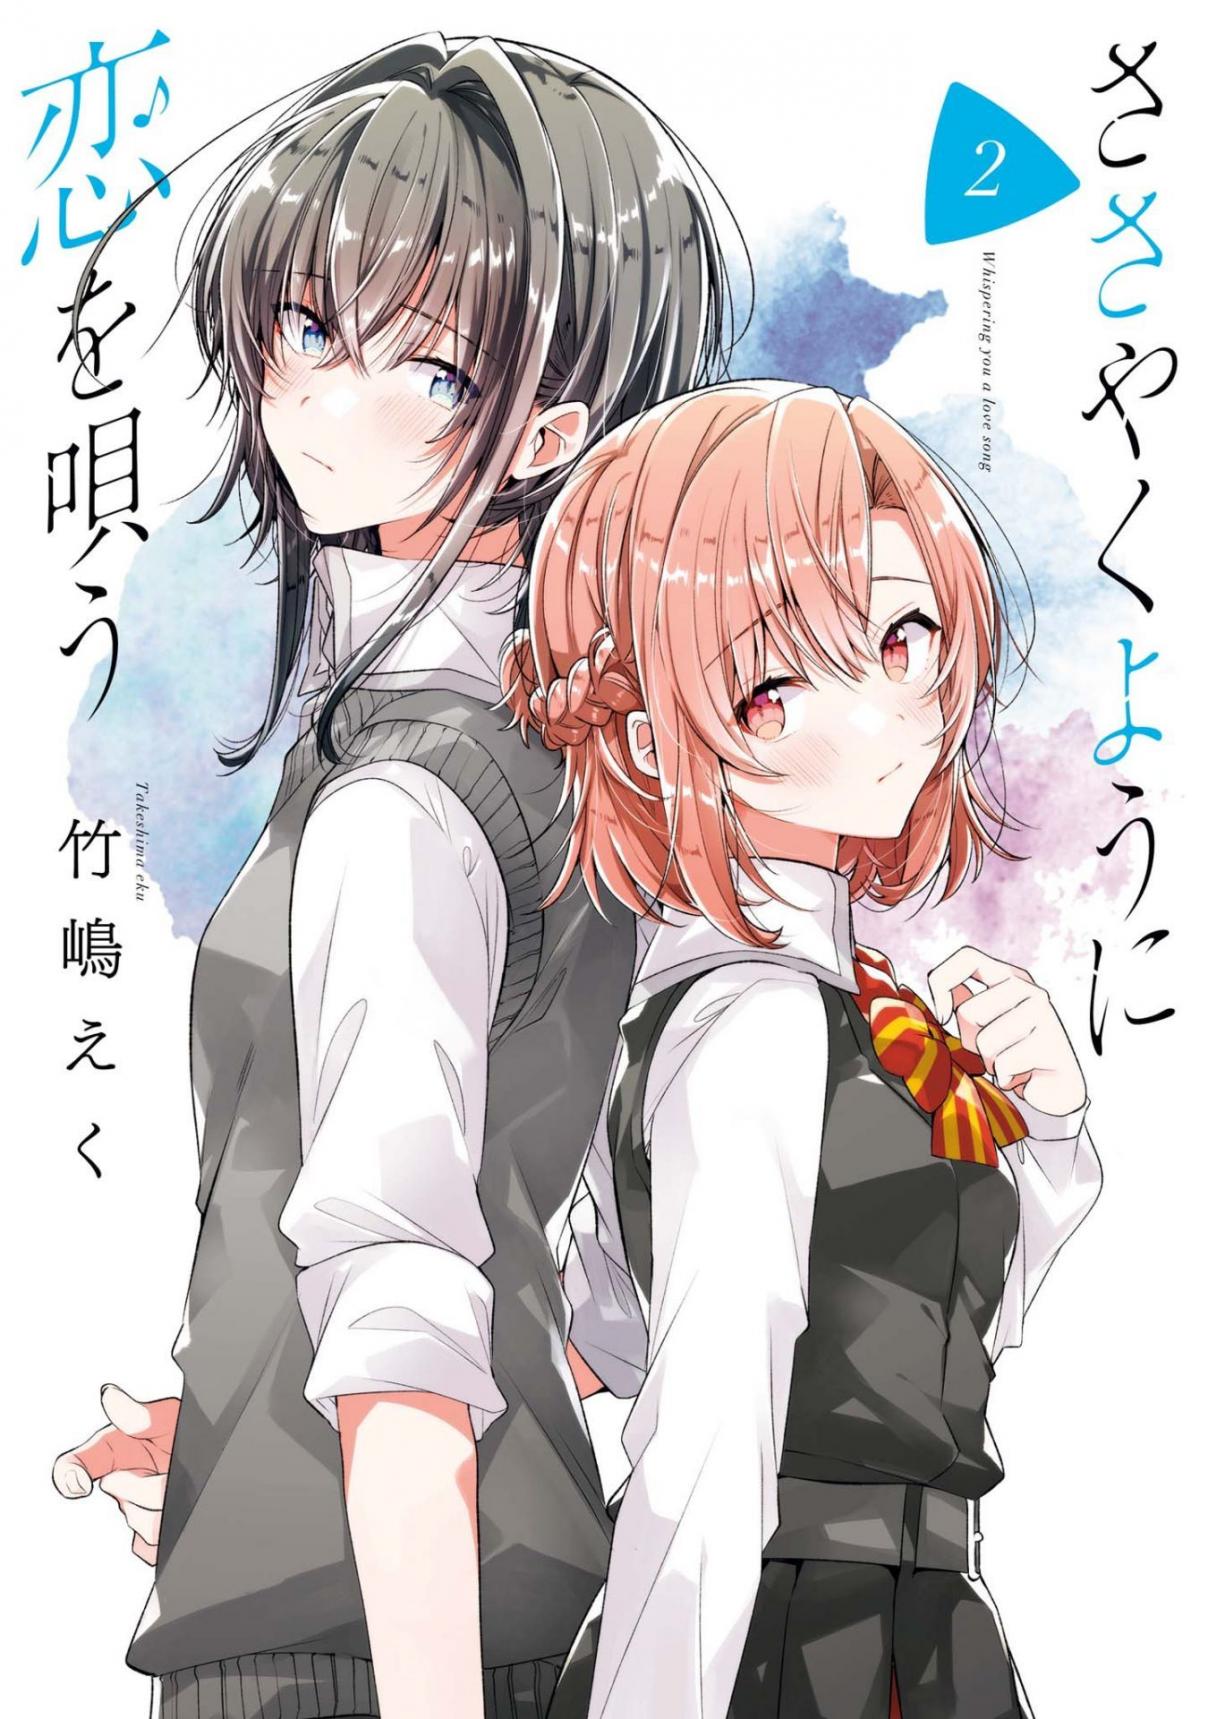 Whispering You a Love Song Vol. 2 Ch. 10.5 Volume 2 Extras